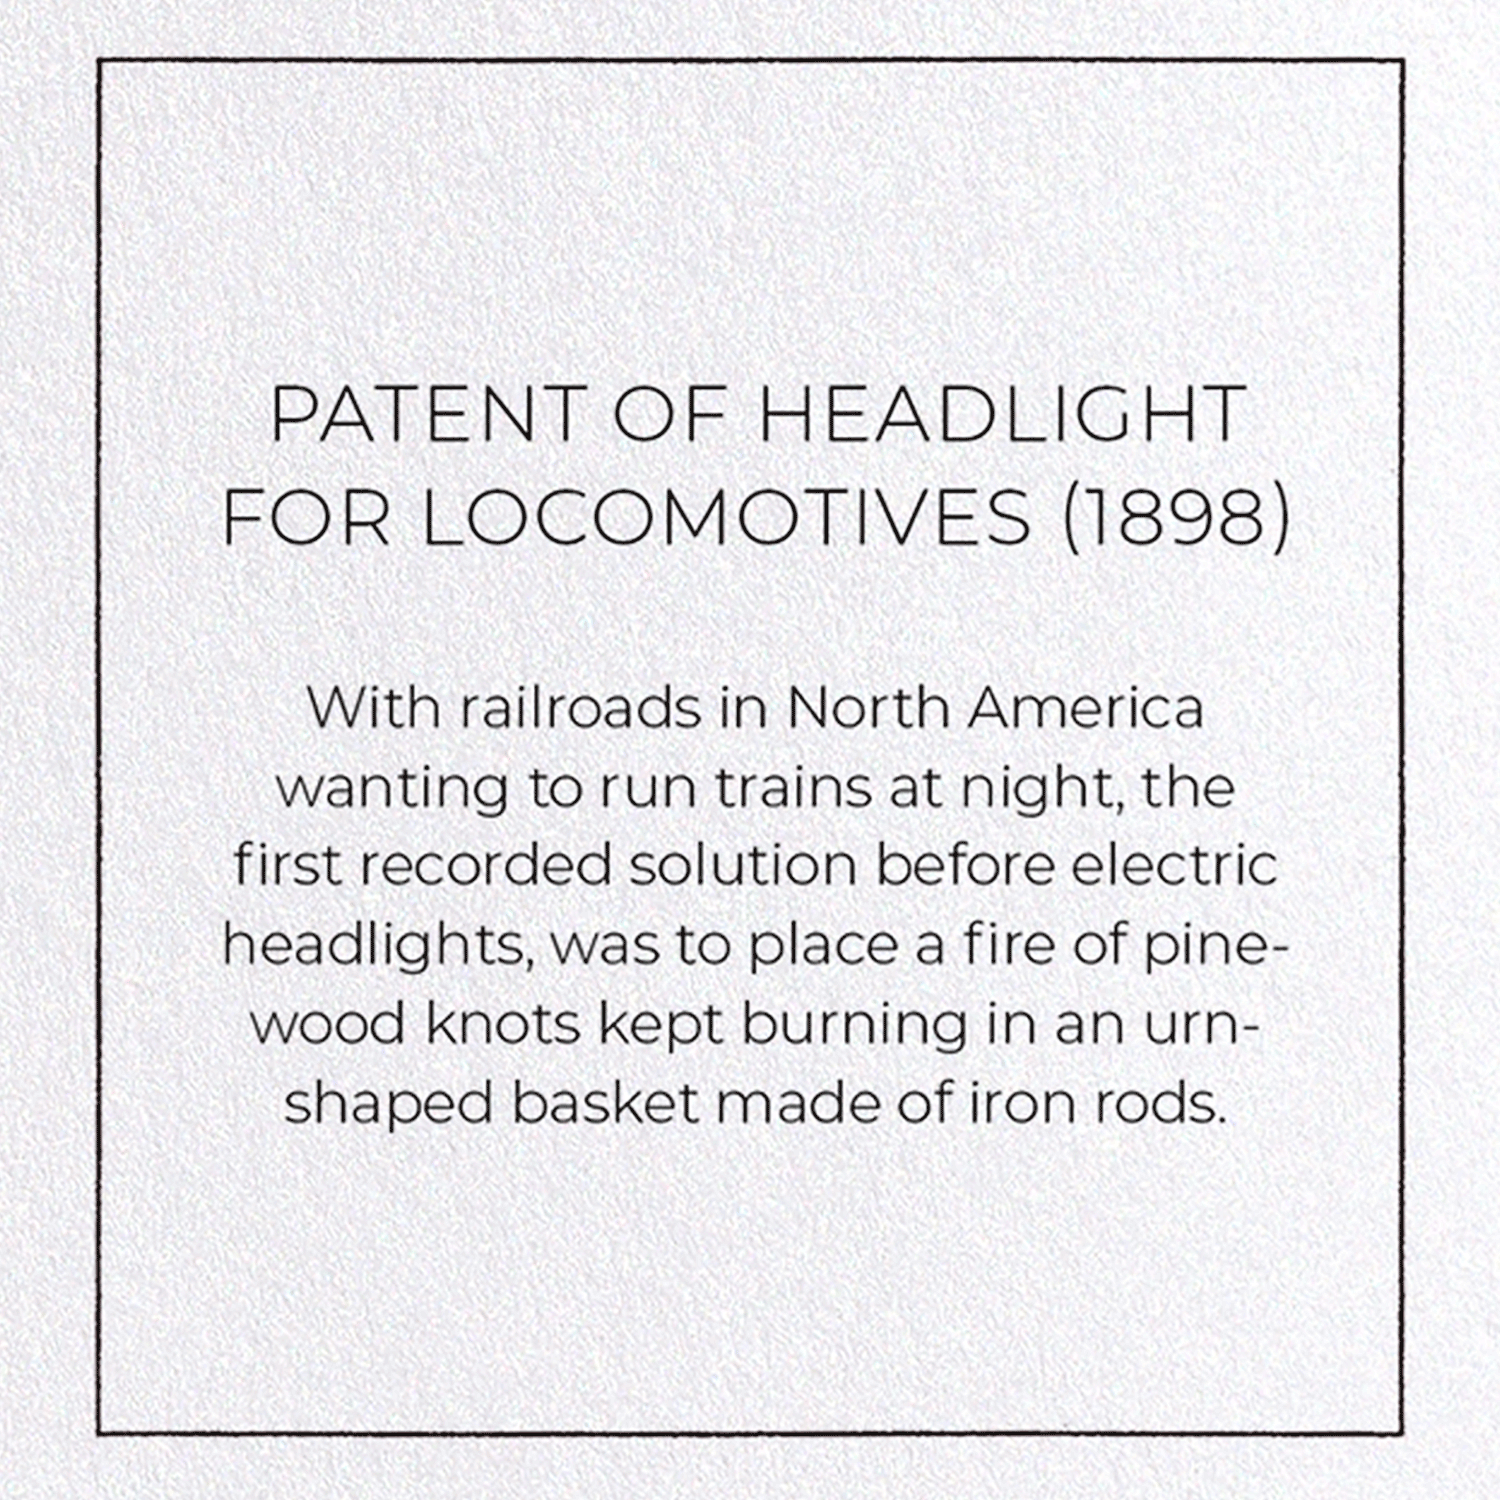 PATENT OF HEADLIGHT FOR LOCOMOTIVES (1898): Patent Greeting Card